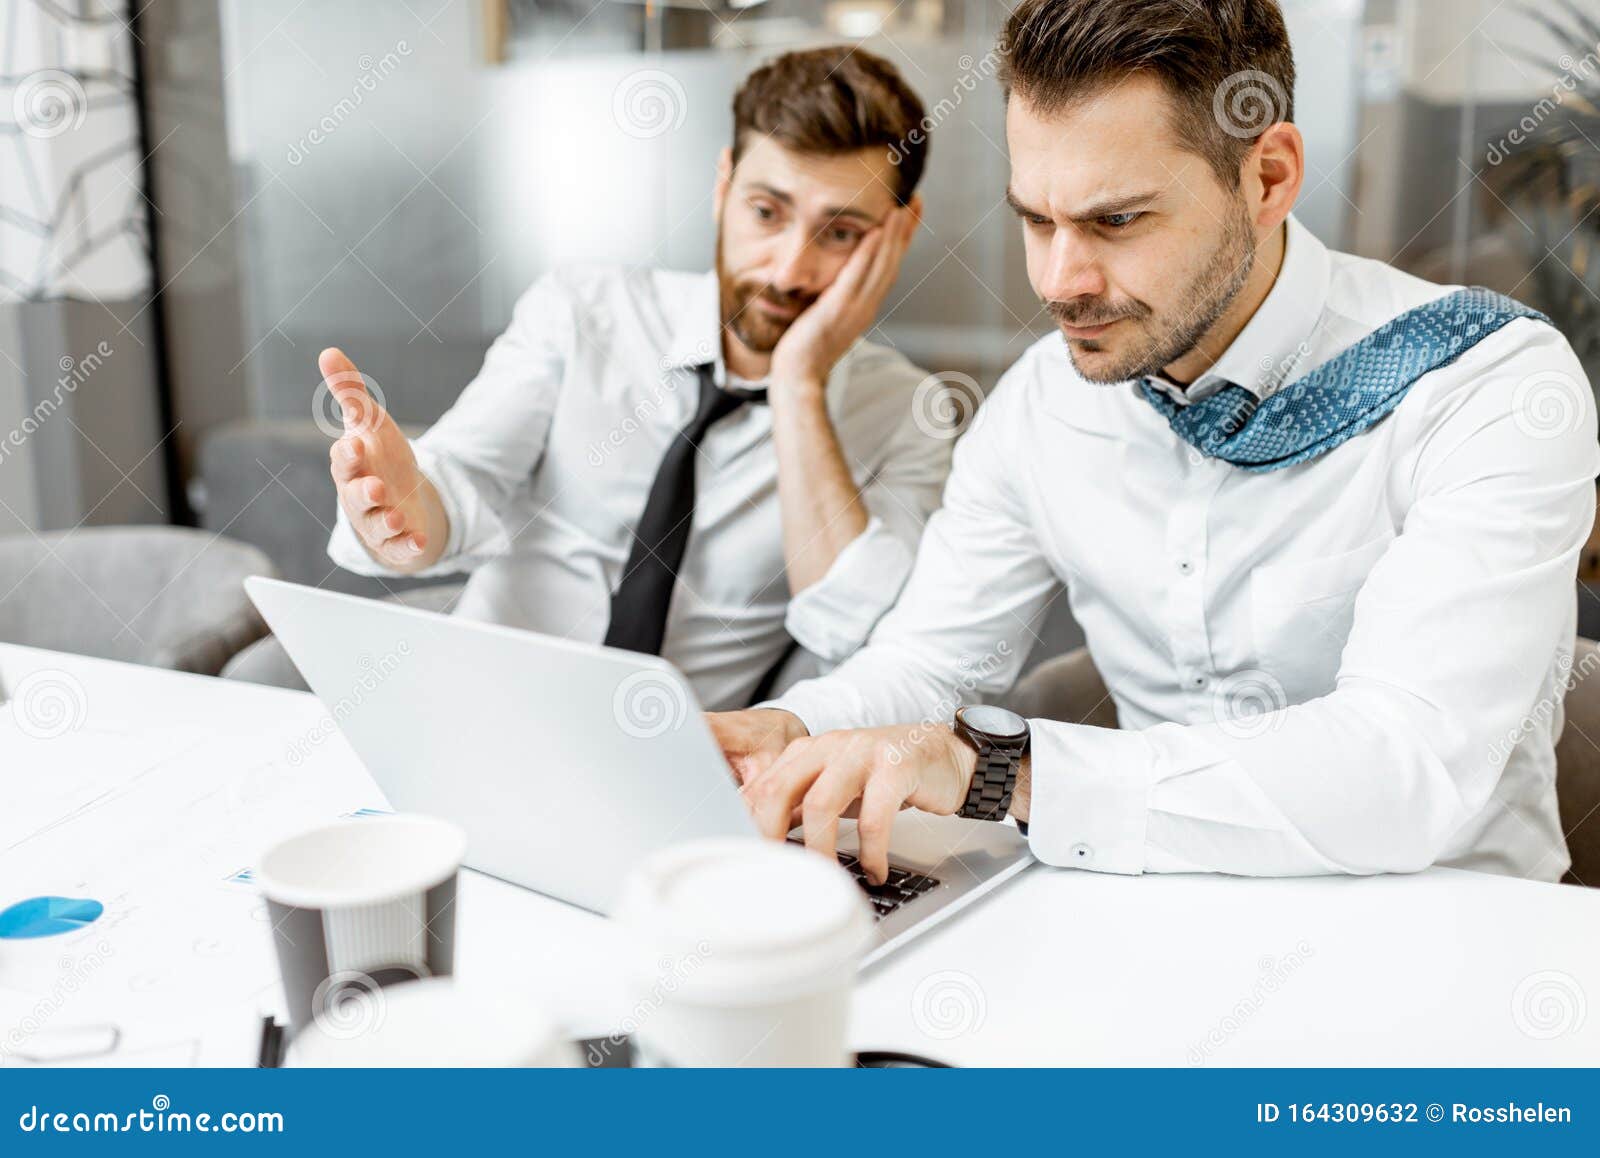 Exhausted Employees Working in the Office Stock Photo - Image of problem,  employee: 164309632